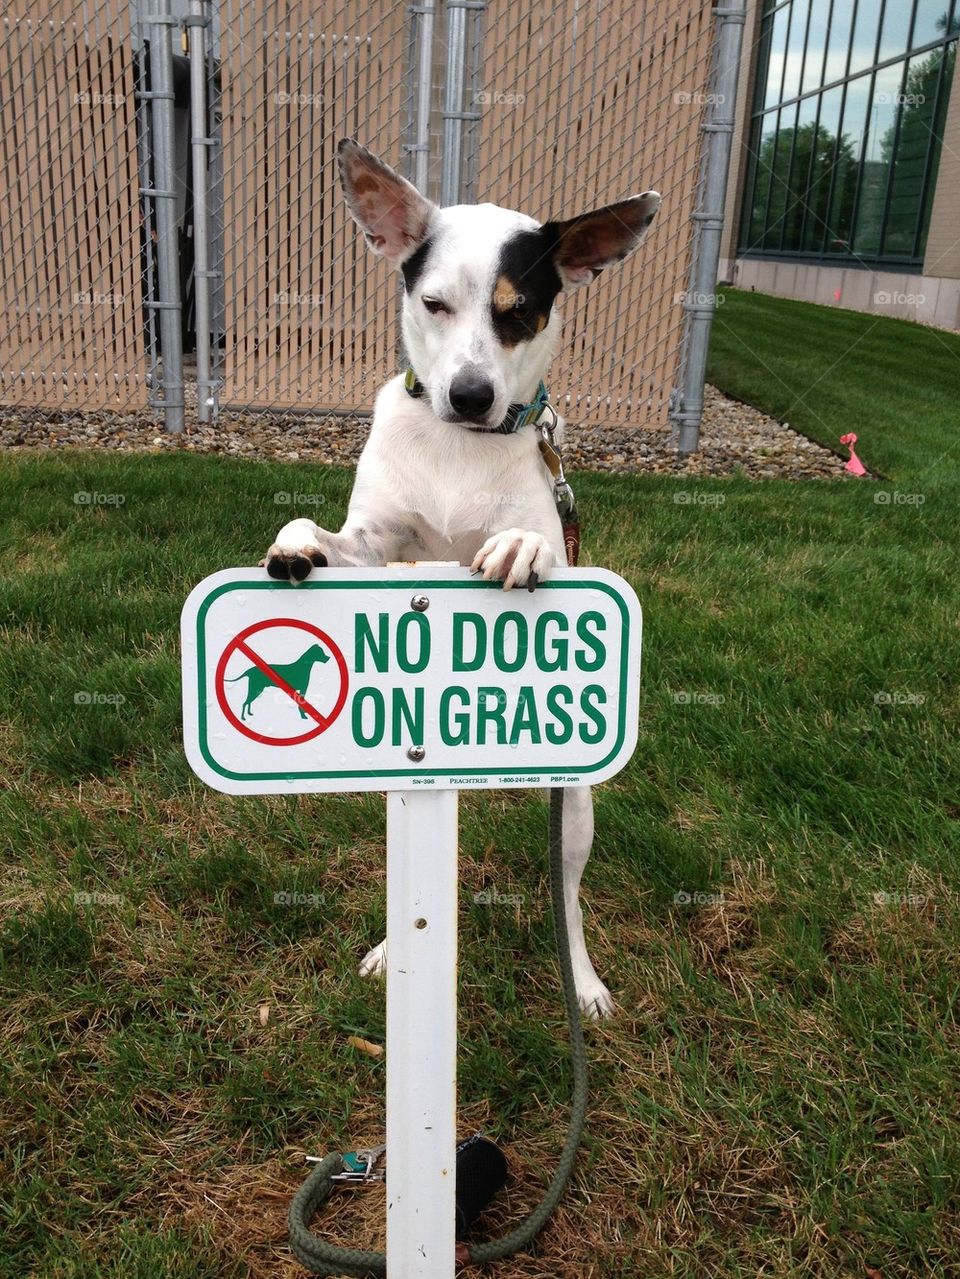 No dogs on grass